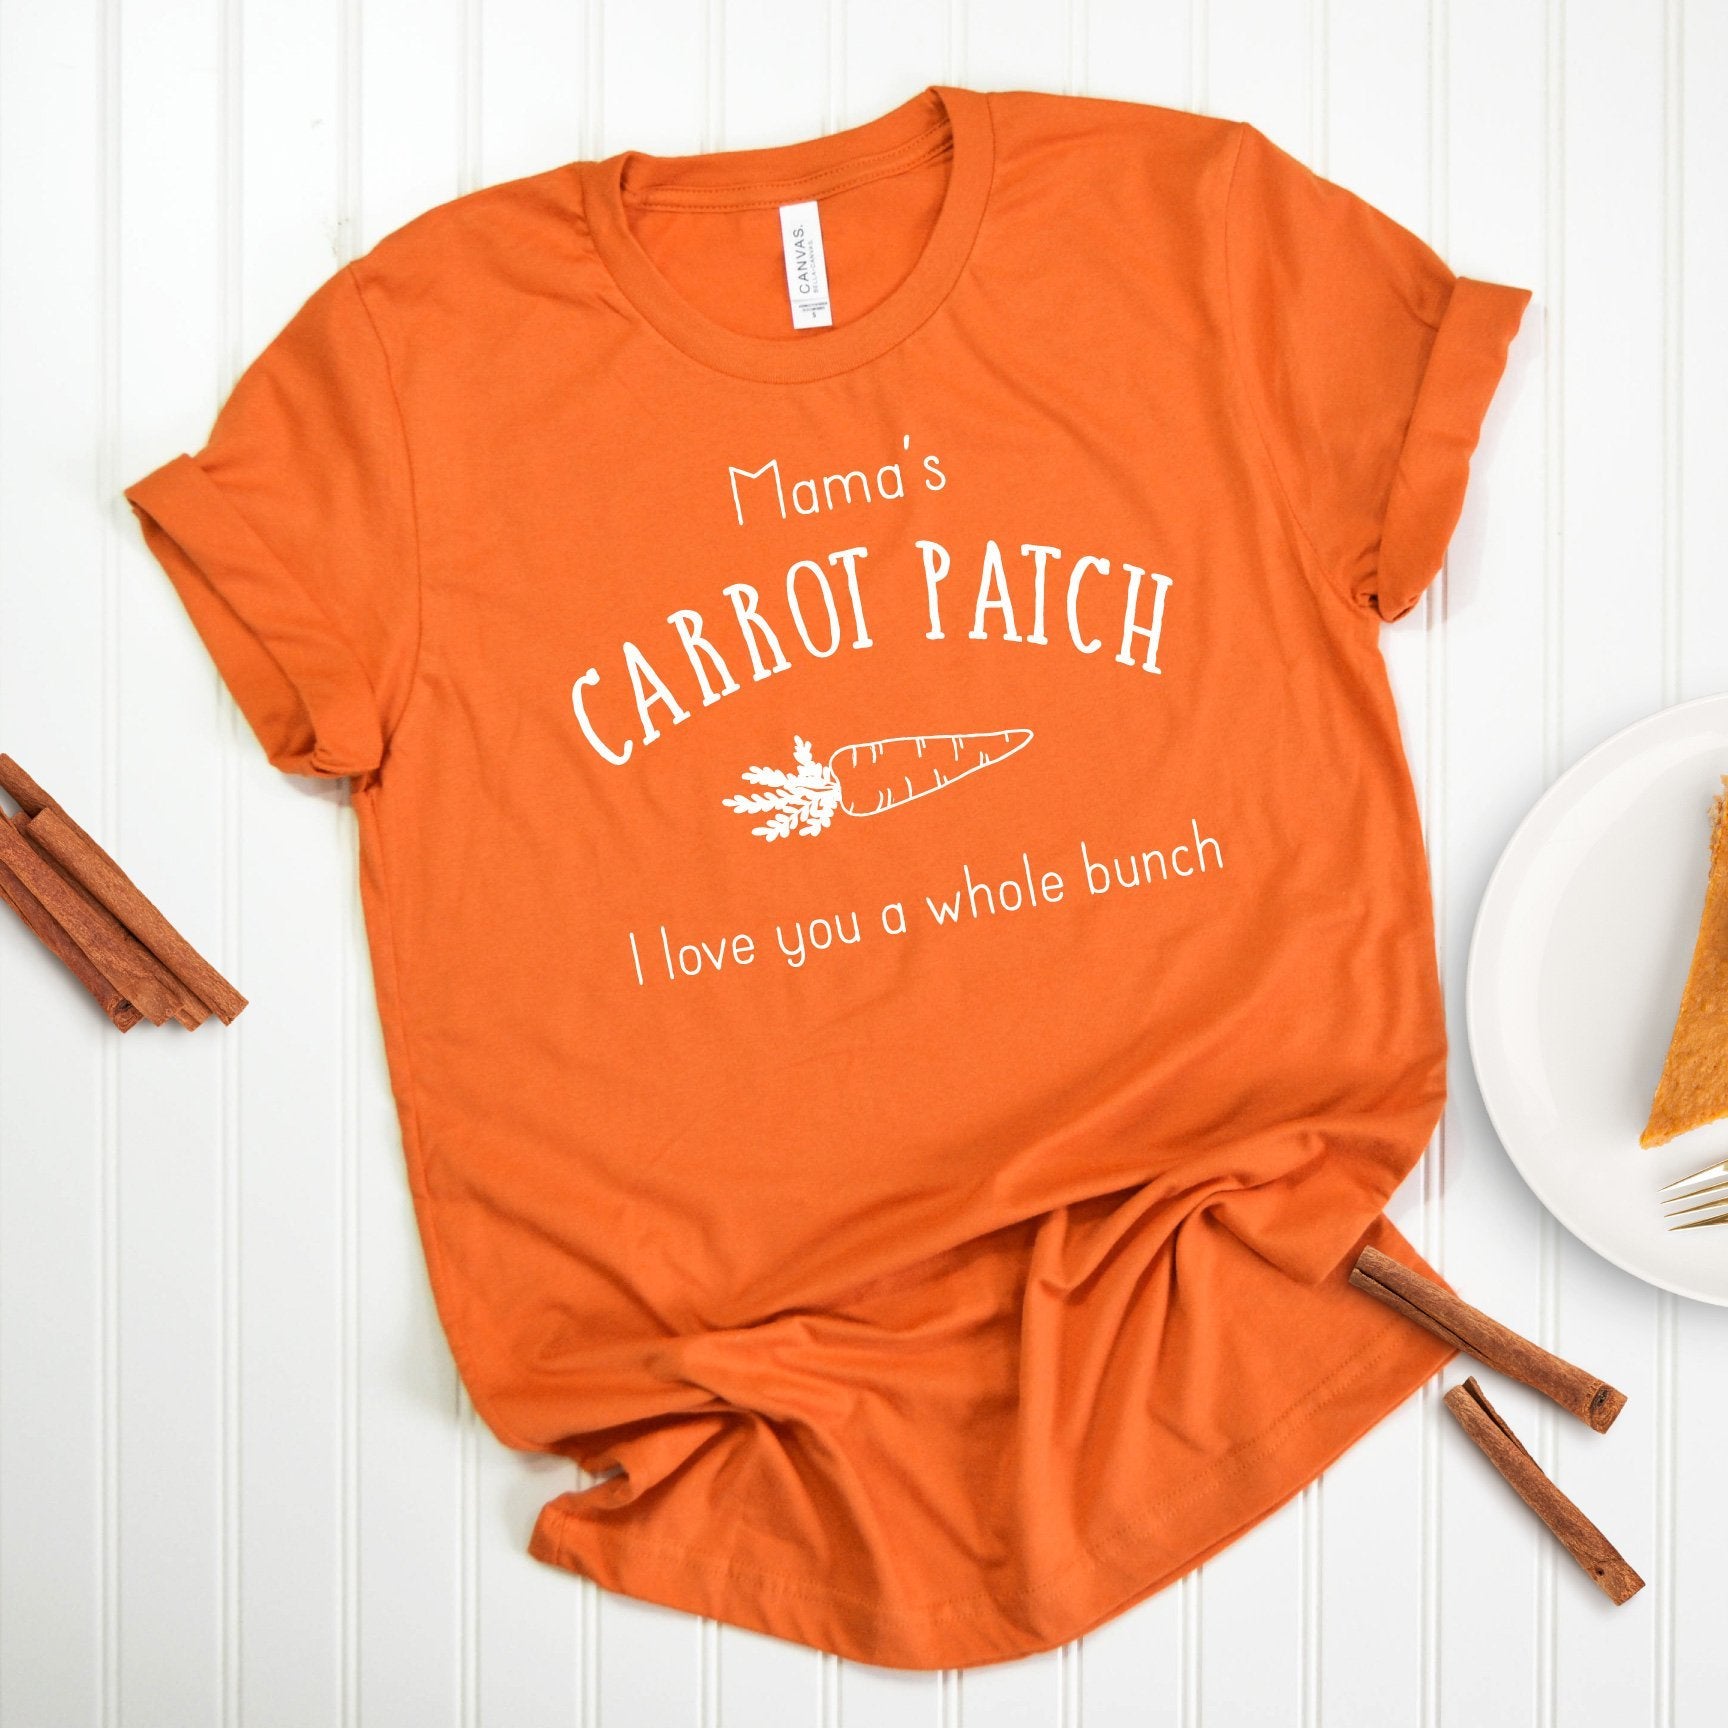 Mama's Carrot Patch Tee